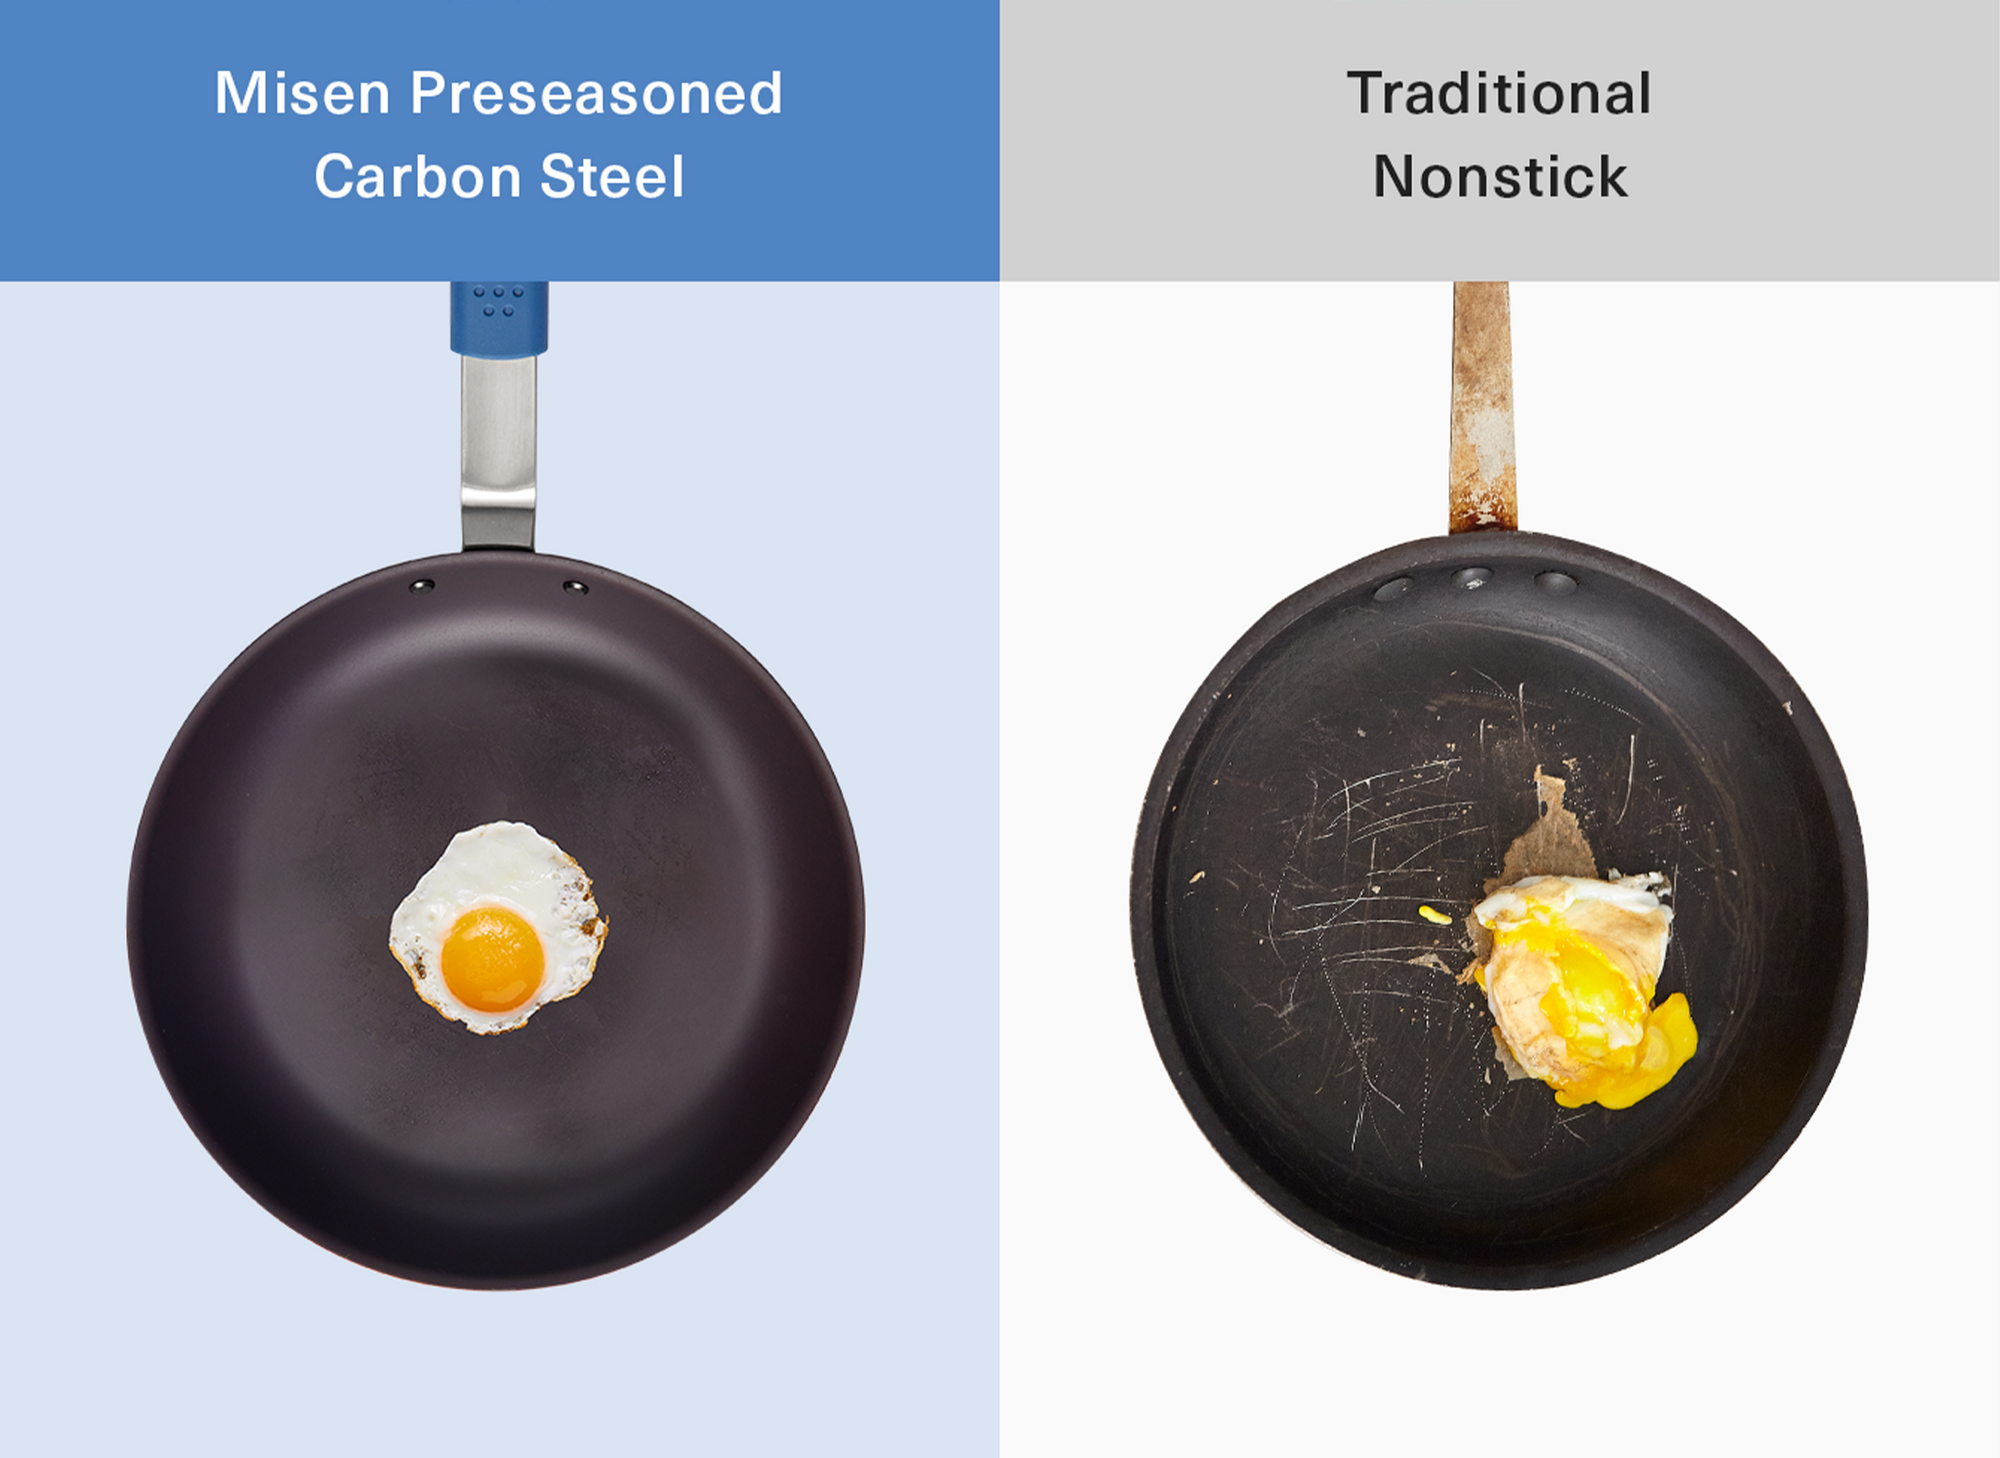 With consistent seasoning, eggs will never stick on a Misen Pre-Seasoned Carbon Steel Pan. With traditional nonstick pans, eggs will stick over time and the nonstick coating will come off.